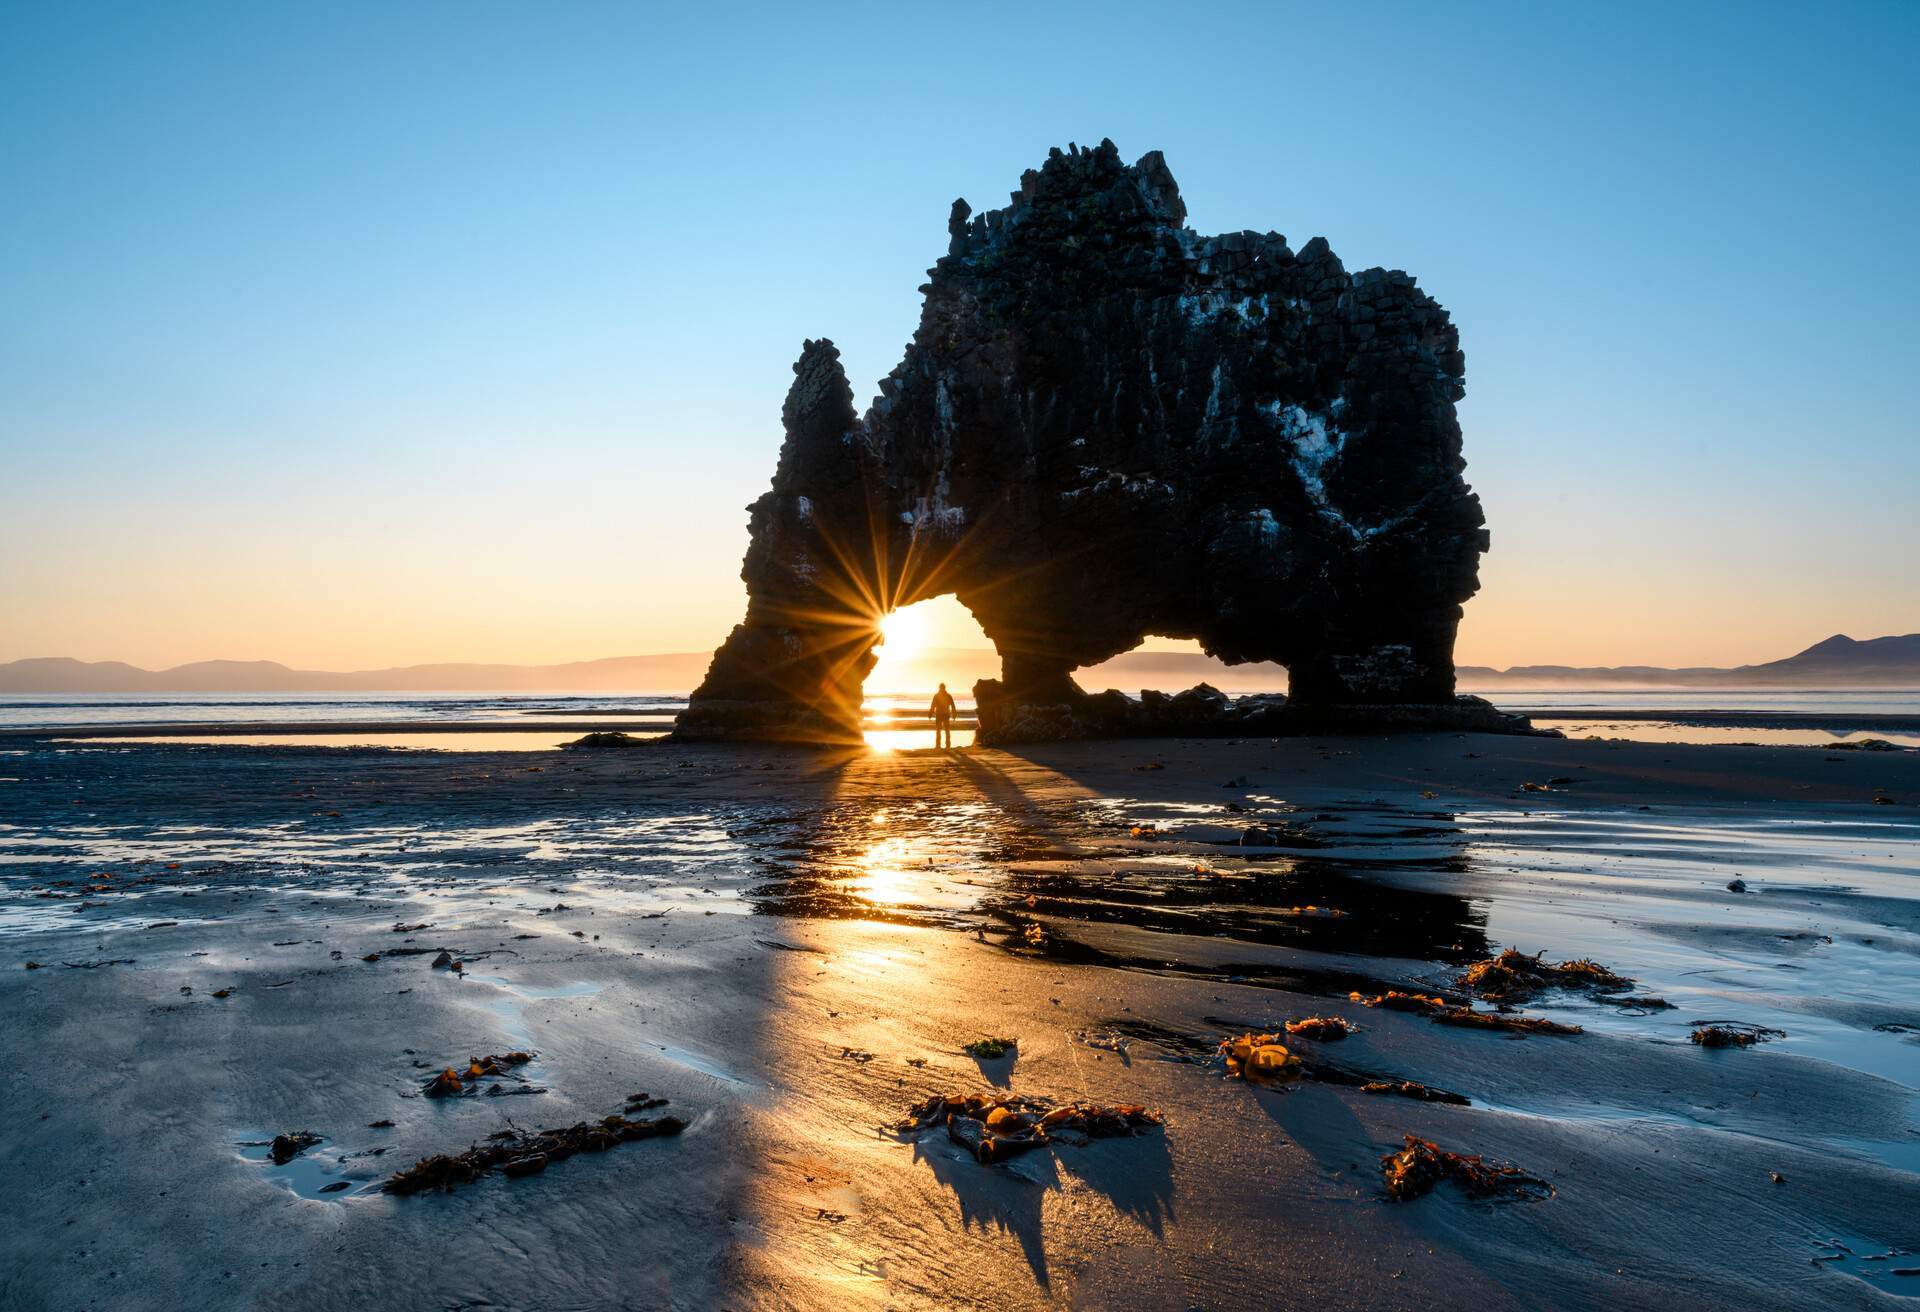 View of a beach in Iceland at sunset.